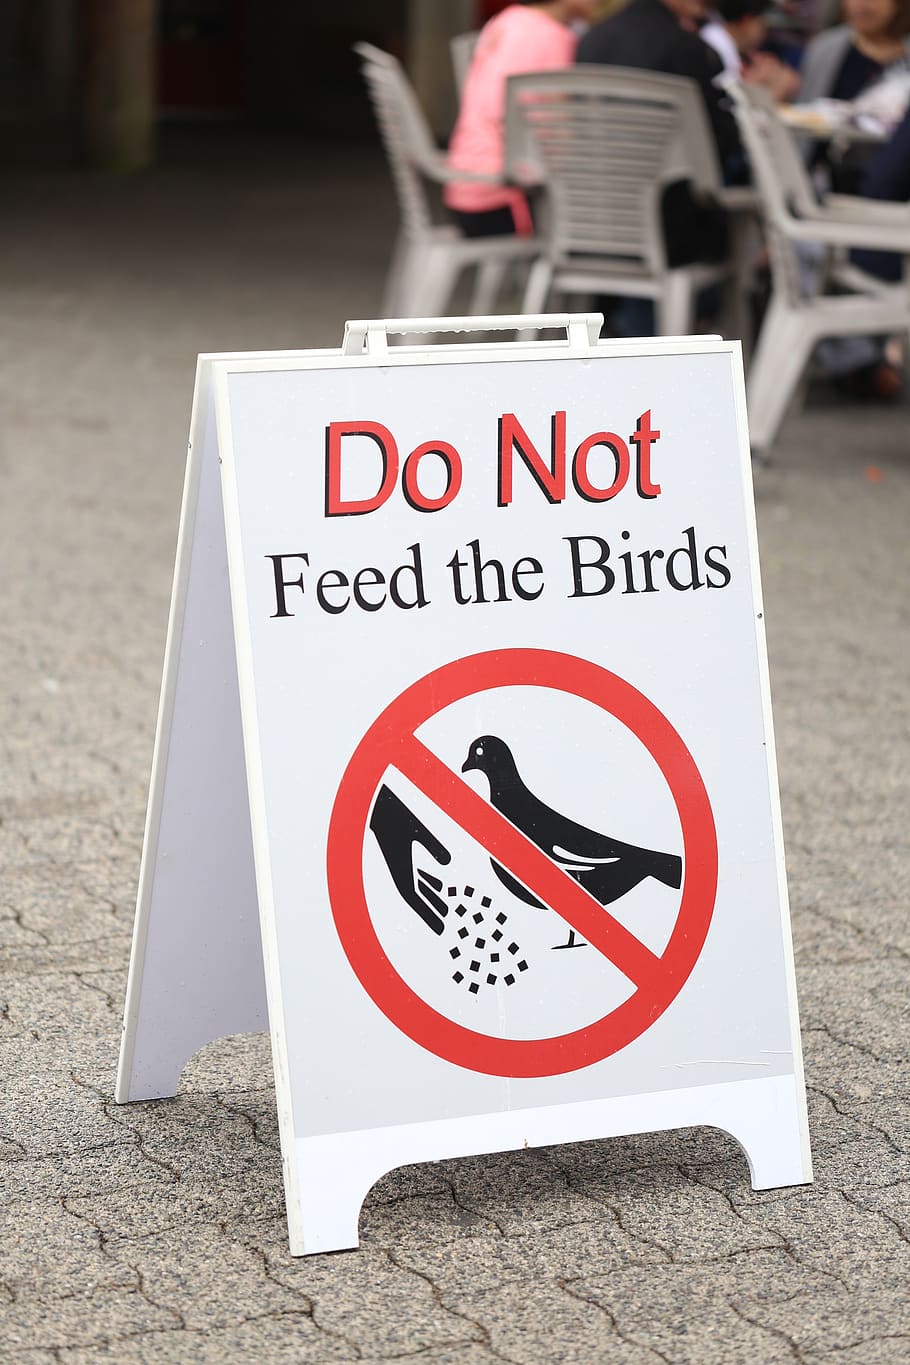 vancouver, canada, downtown, granville island, do not feed the birds, sign, caution, prohibited, western script, communication